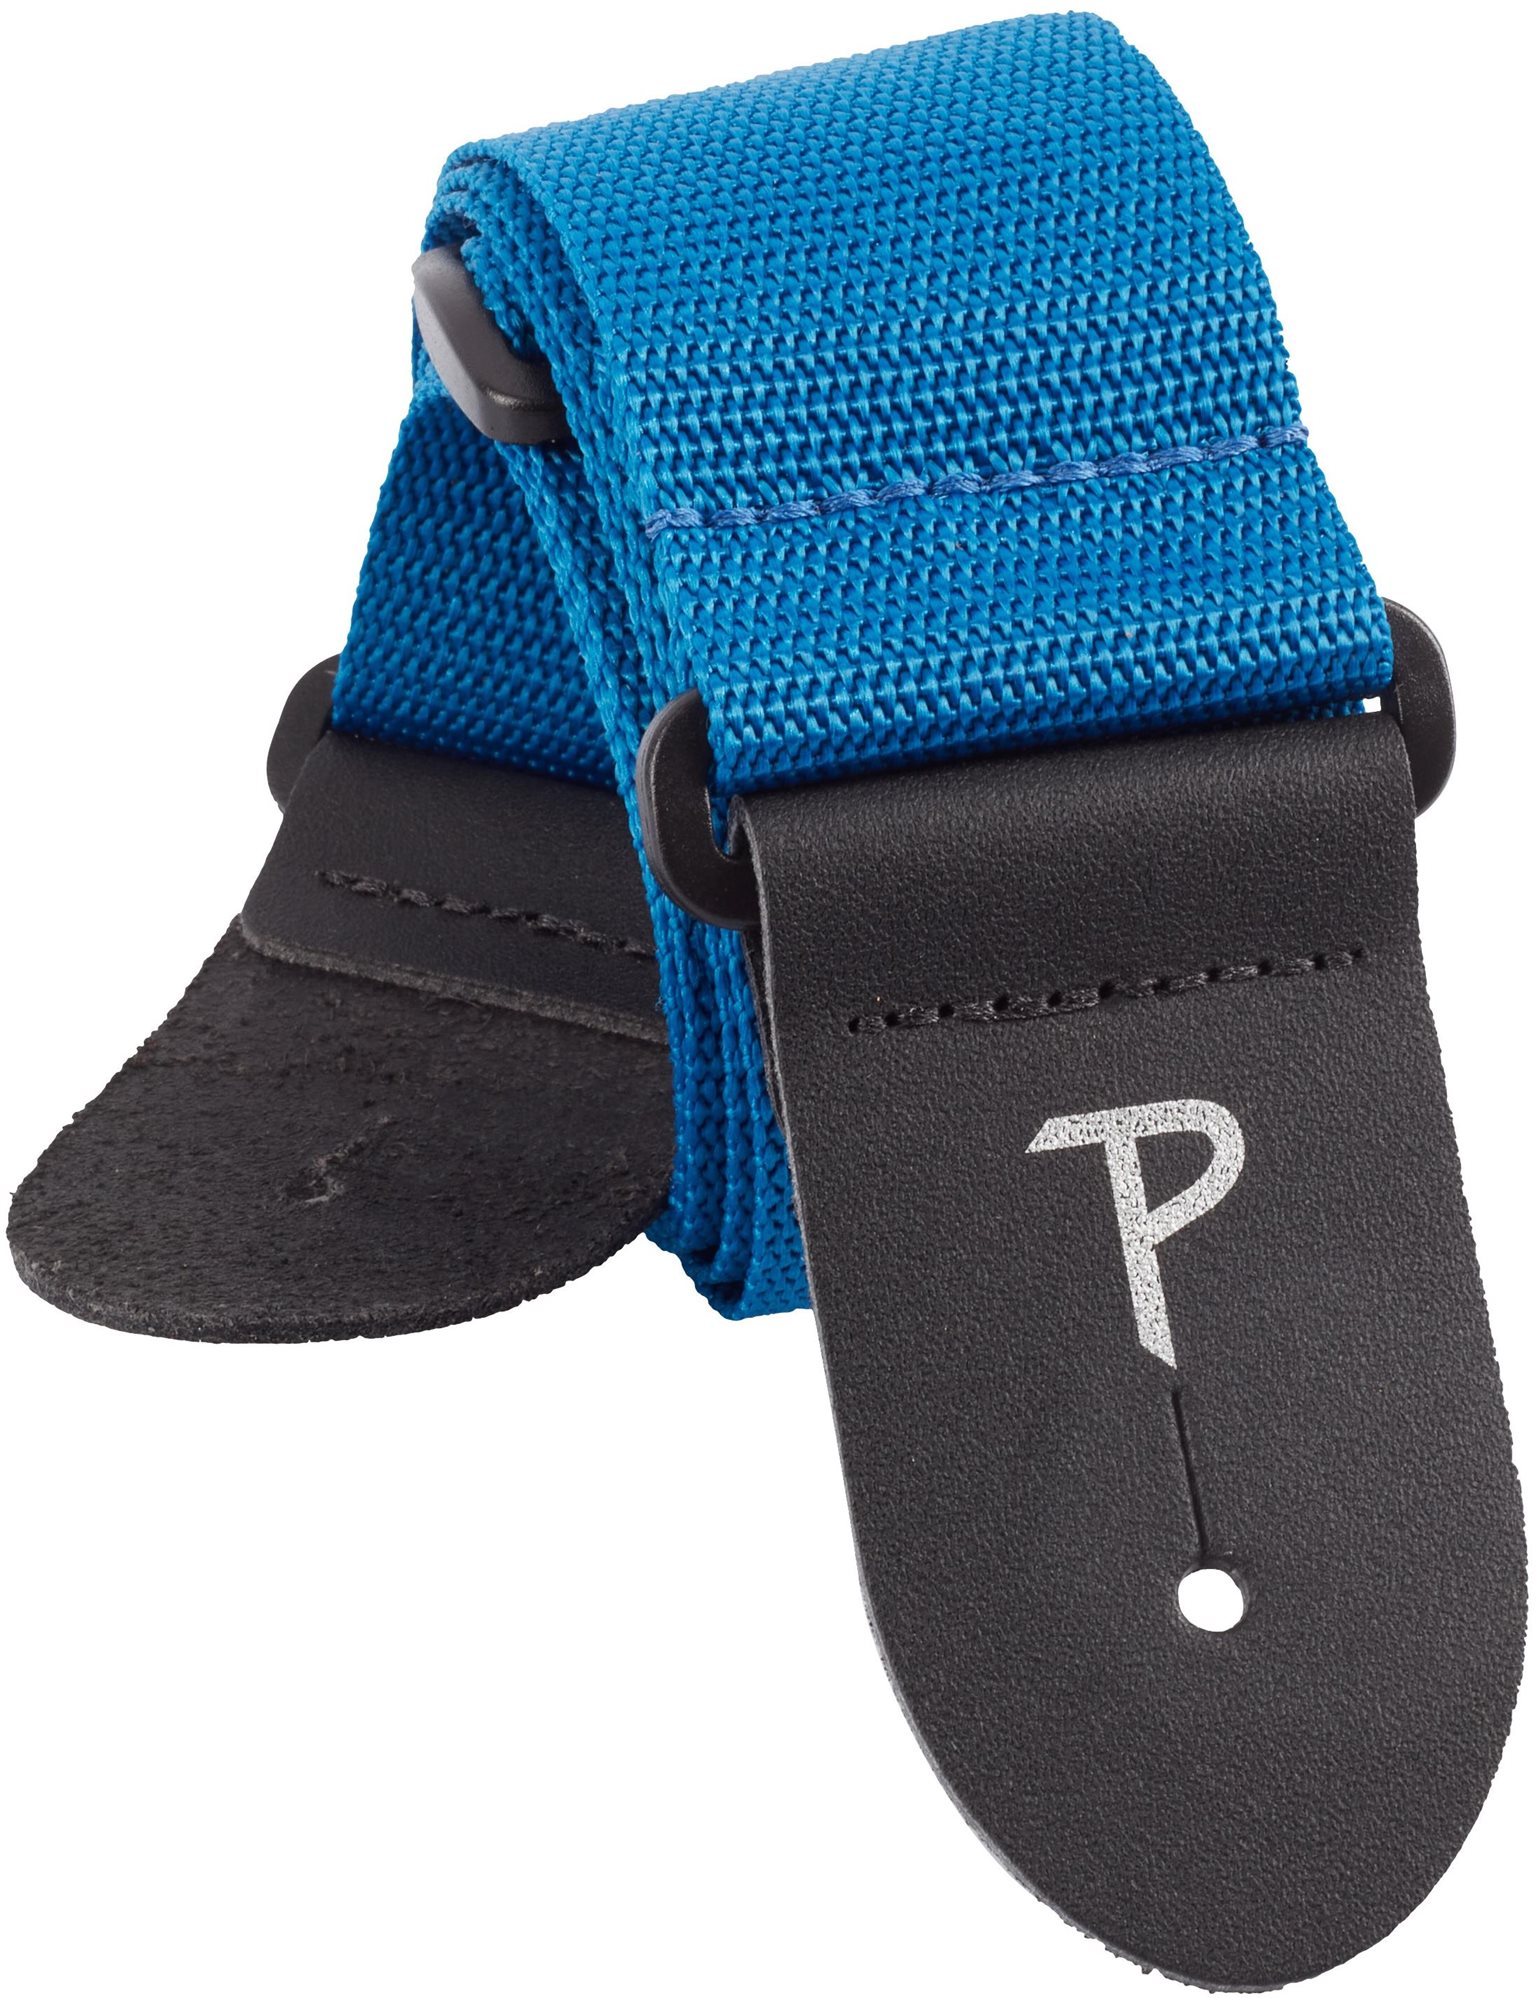 PERRIS LEATHERS Poly Pro Extra Long Blue